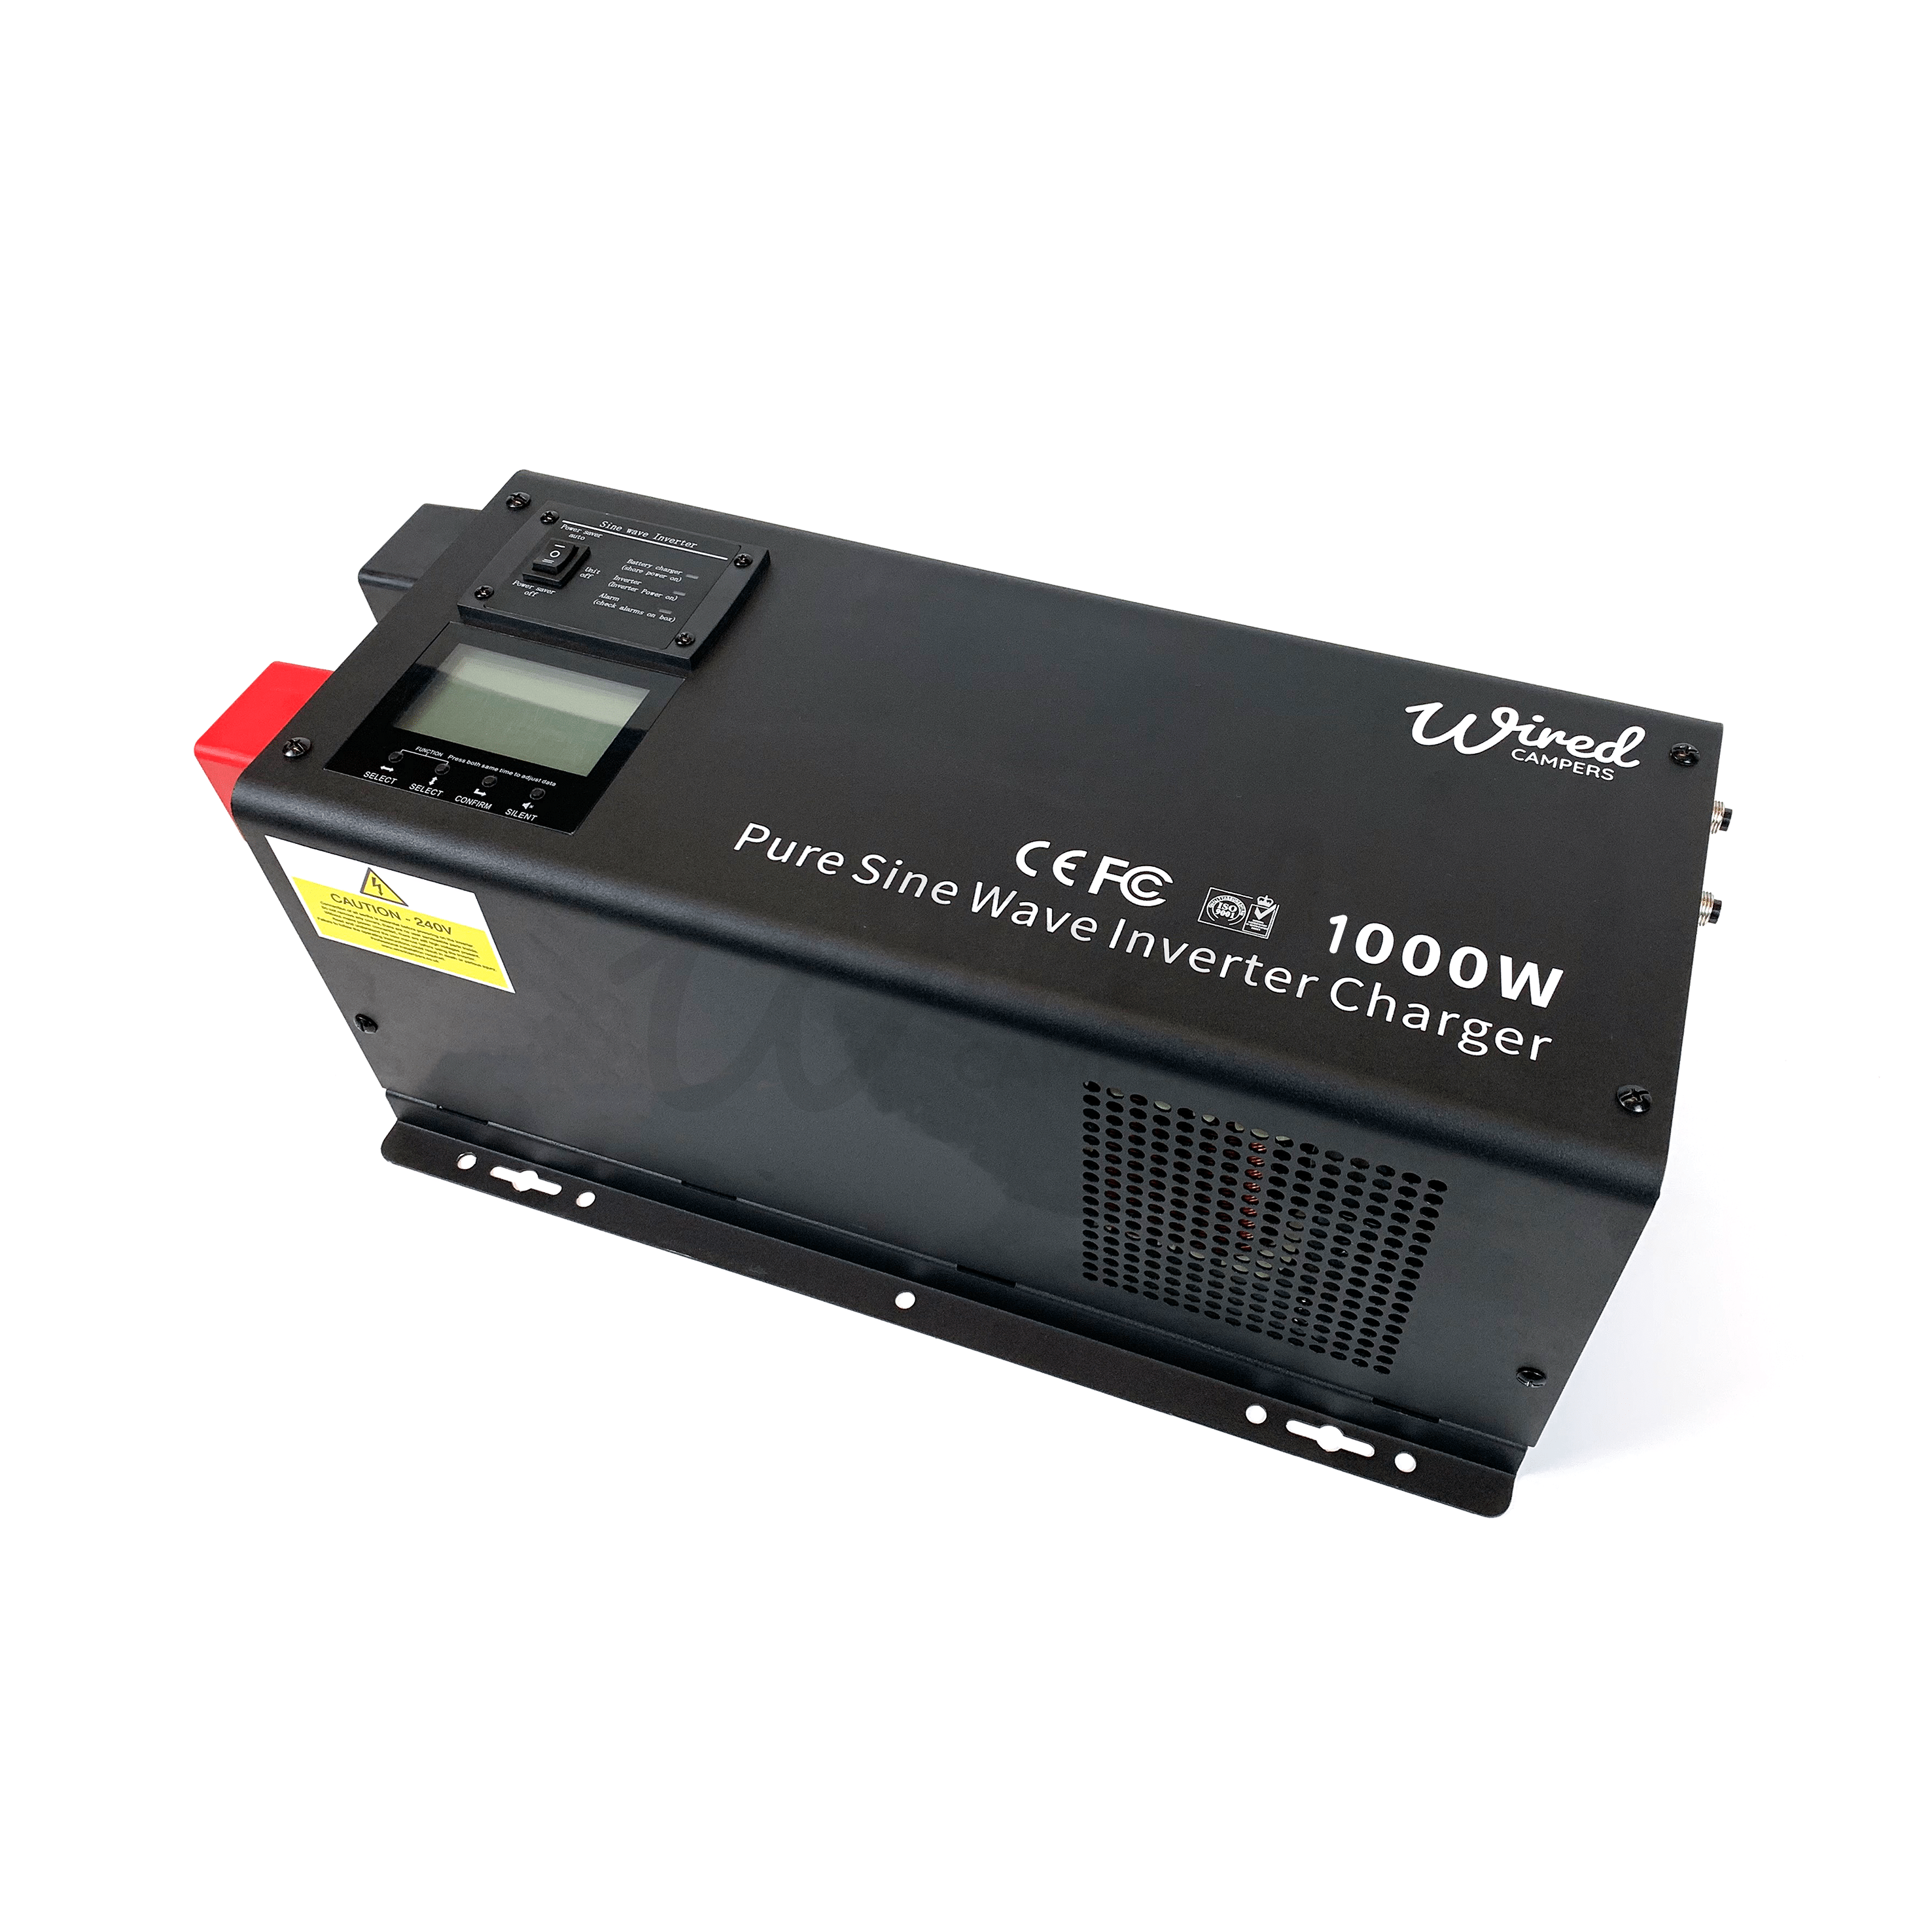 1000W (1kW) Low Frequency Hard Wired 12V Inverter Charger - 240V 50HZ